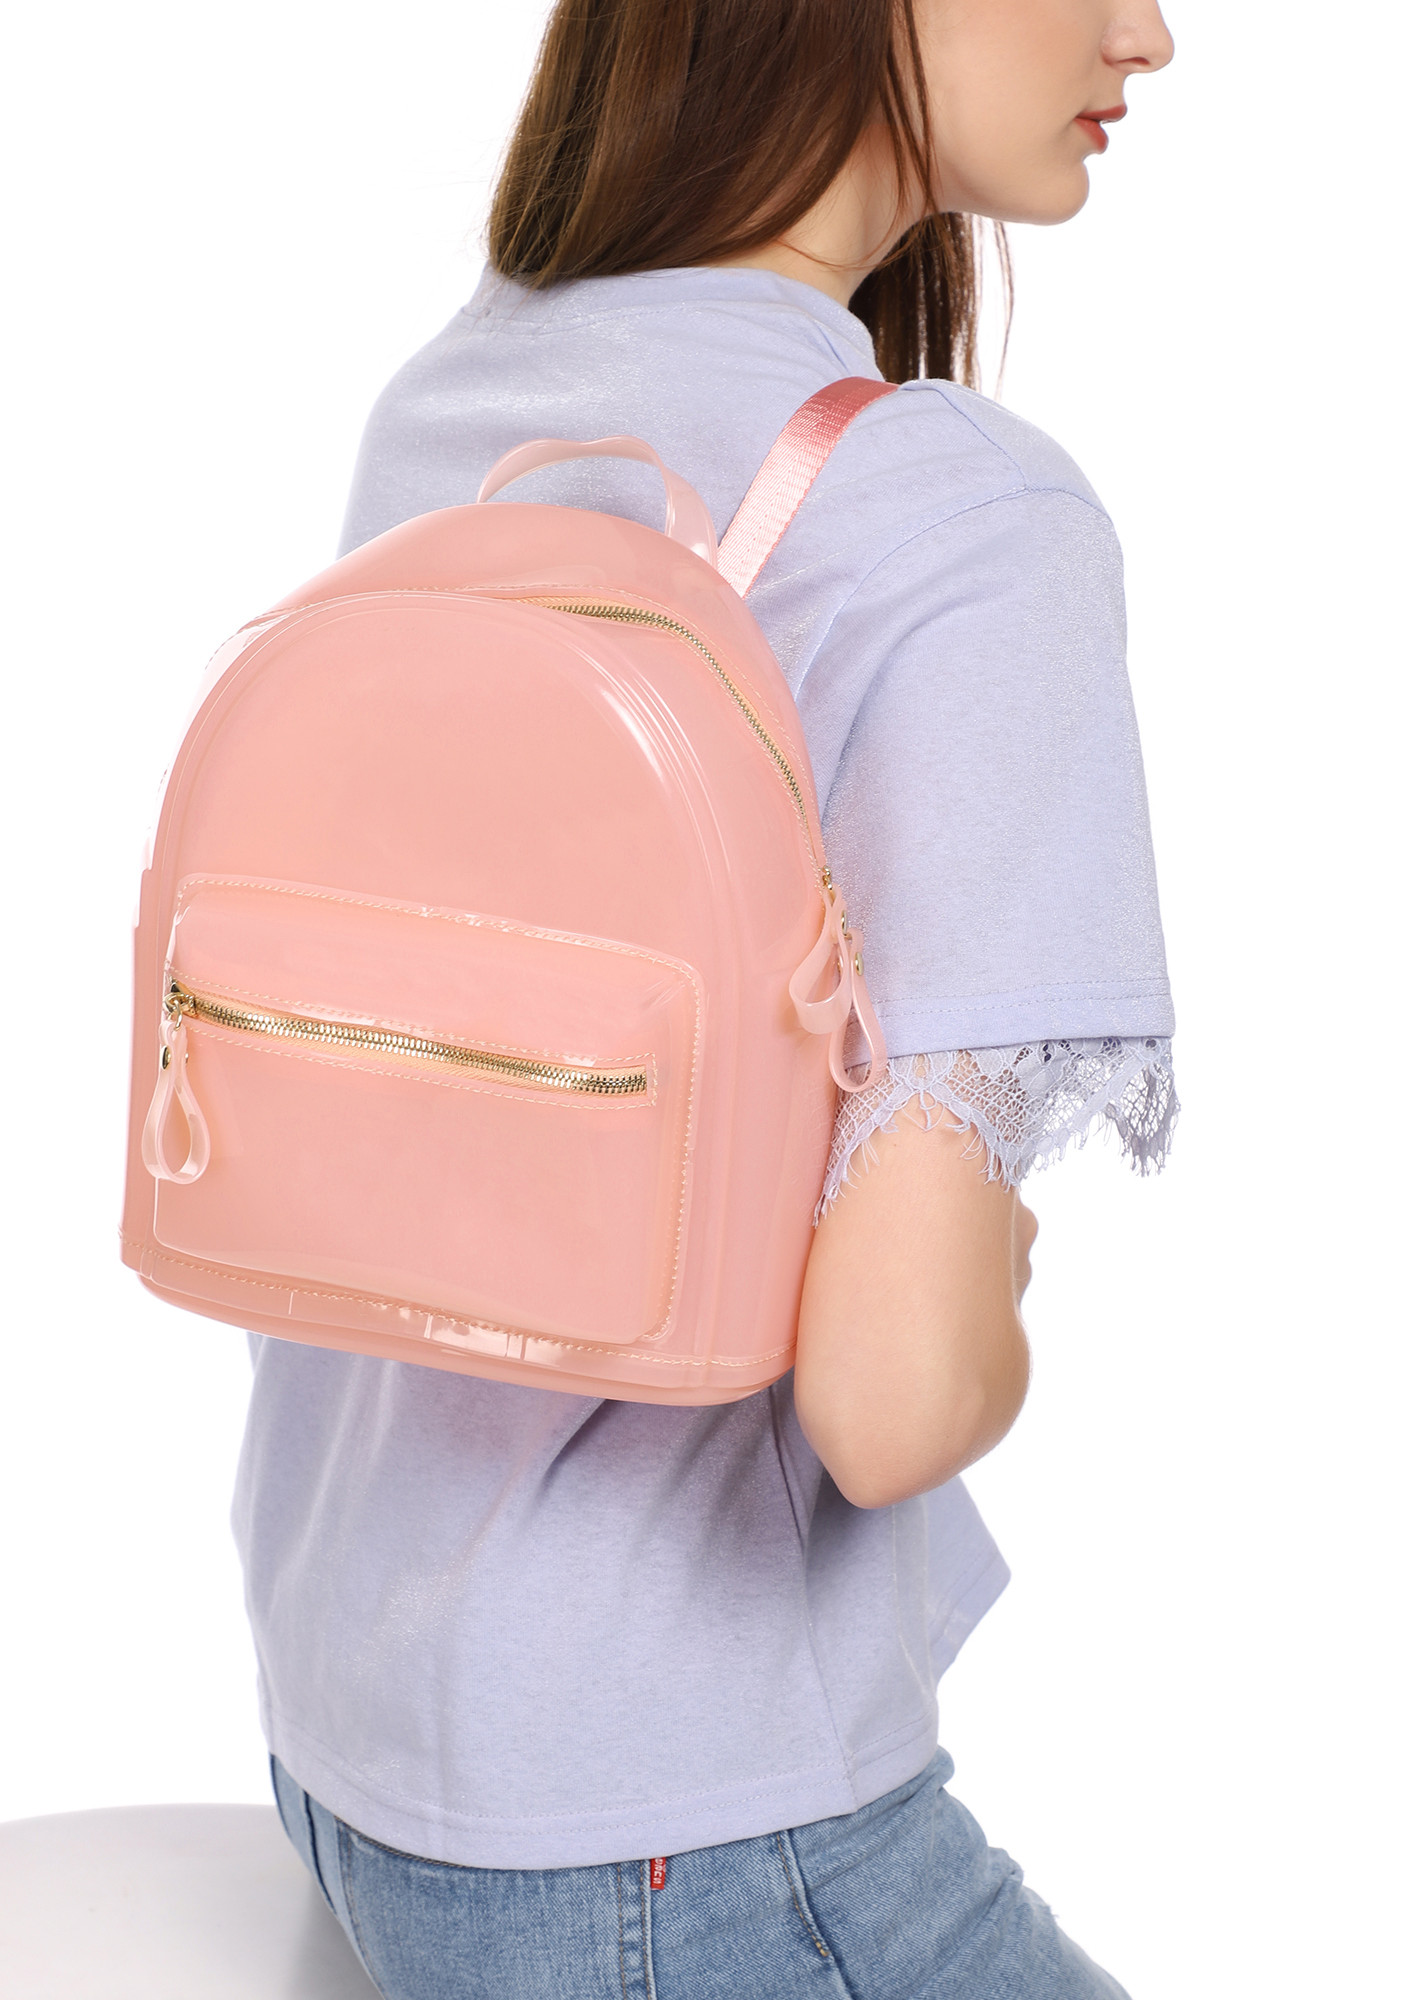 TAKE ME BACK TO SCHOOL PINK BACKPACK